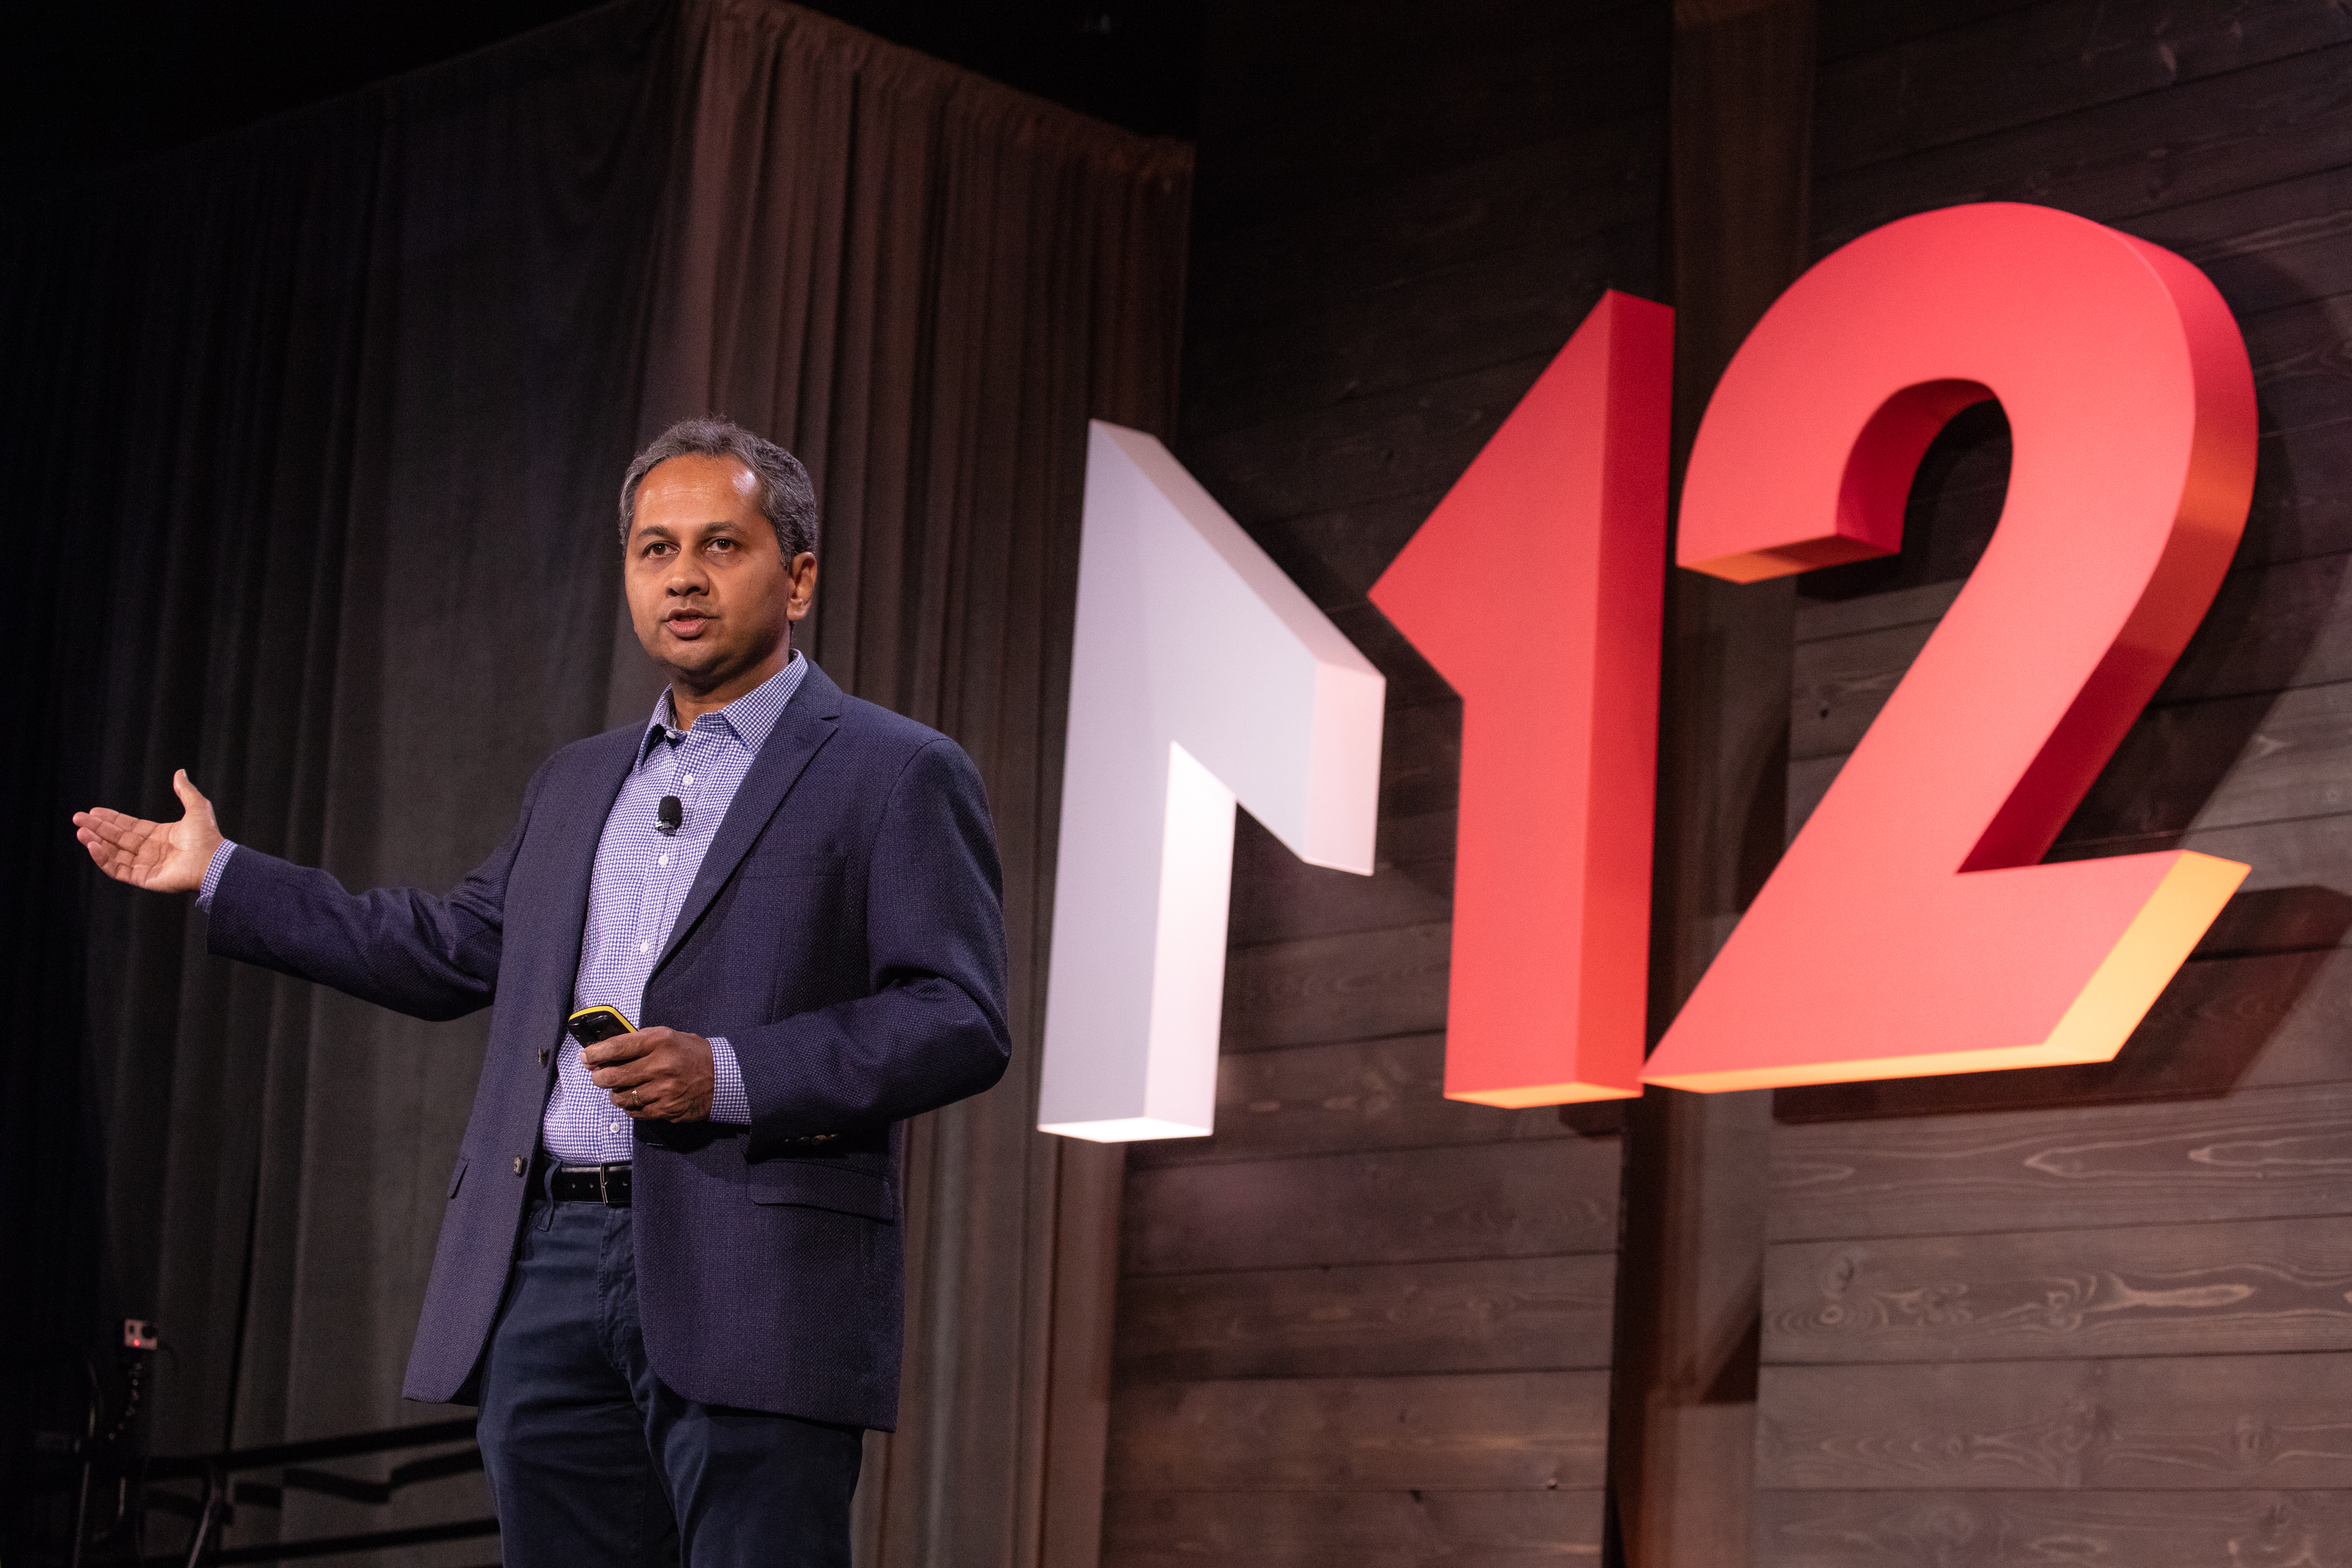 Nagraj Kashyap standing onstage at the M12 Summit in front of large M12 sign.